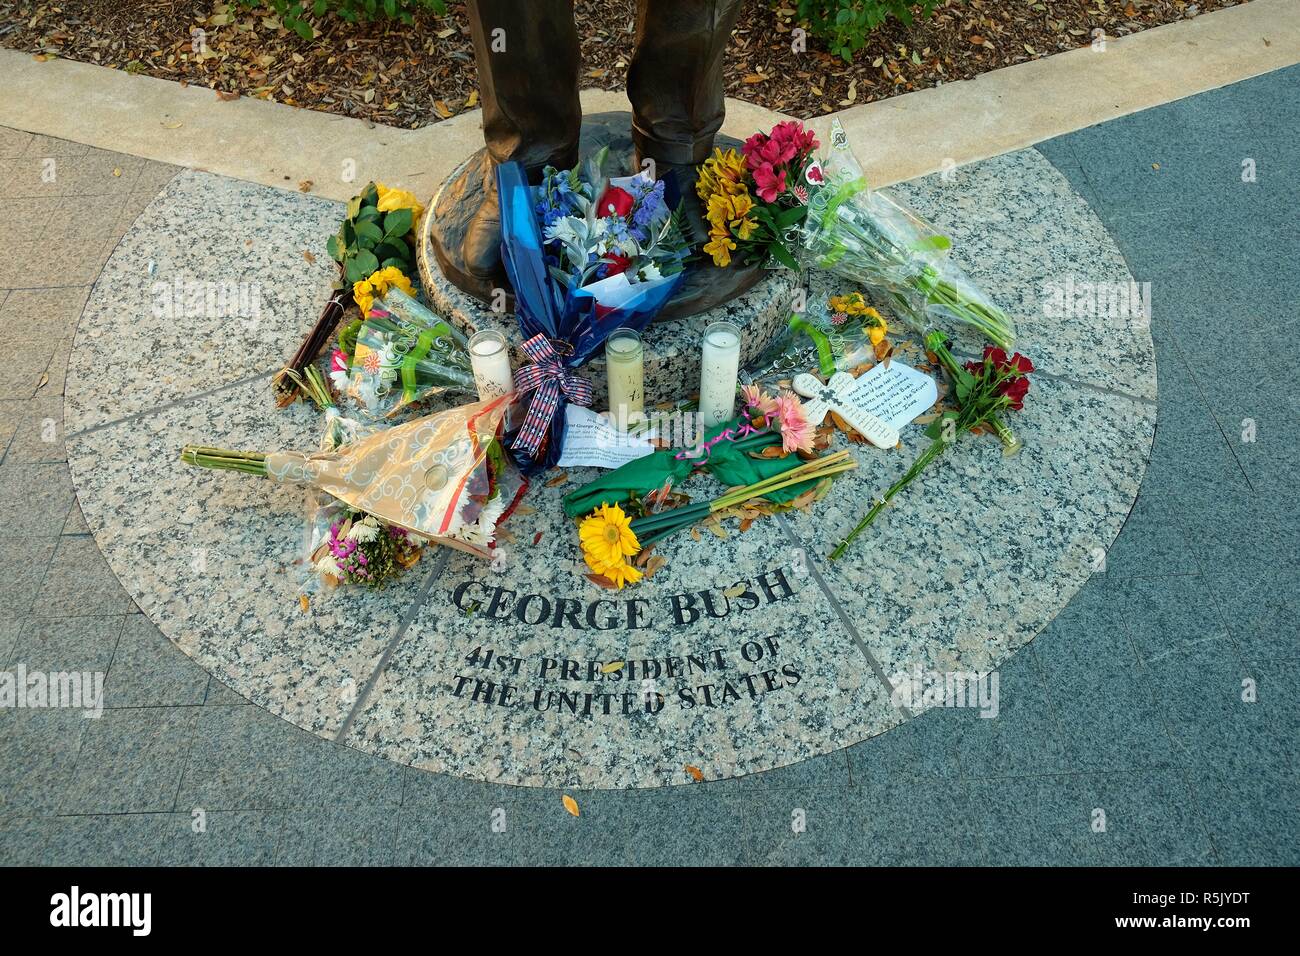 College Station, Texas, USA. 1 Dec., 2018. Flowers at the base of the George H.W. Bush statue outside the George Bush Presidential Library in College Station, Texas, USA.  Former President Bush died Nov. 30, 2018 at the age of 94. Stock Photo